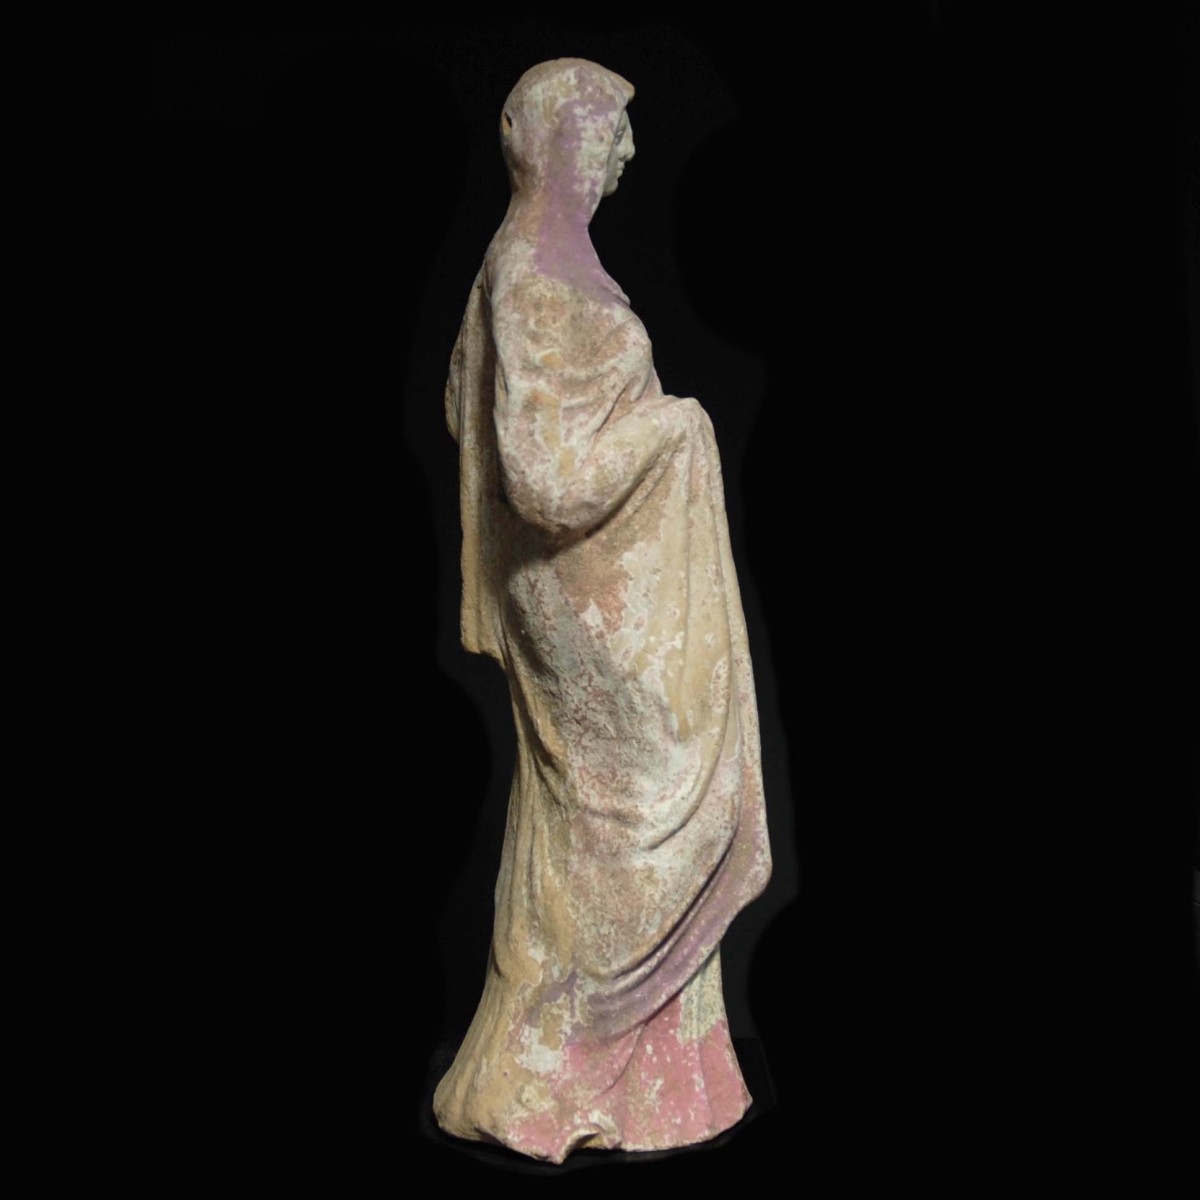 Large terracotta statuette of a woman from Canosa right